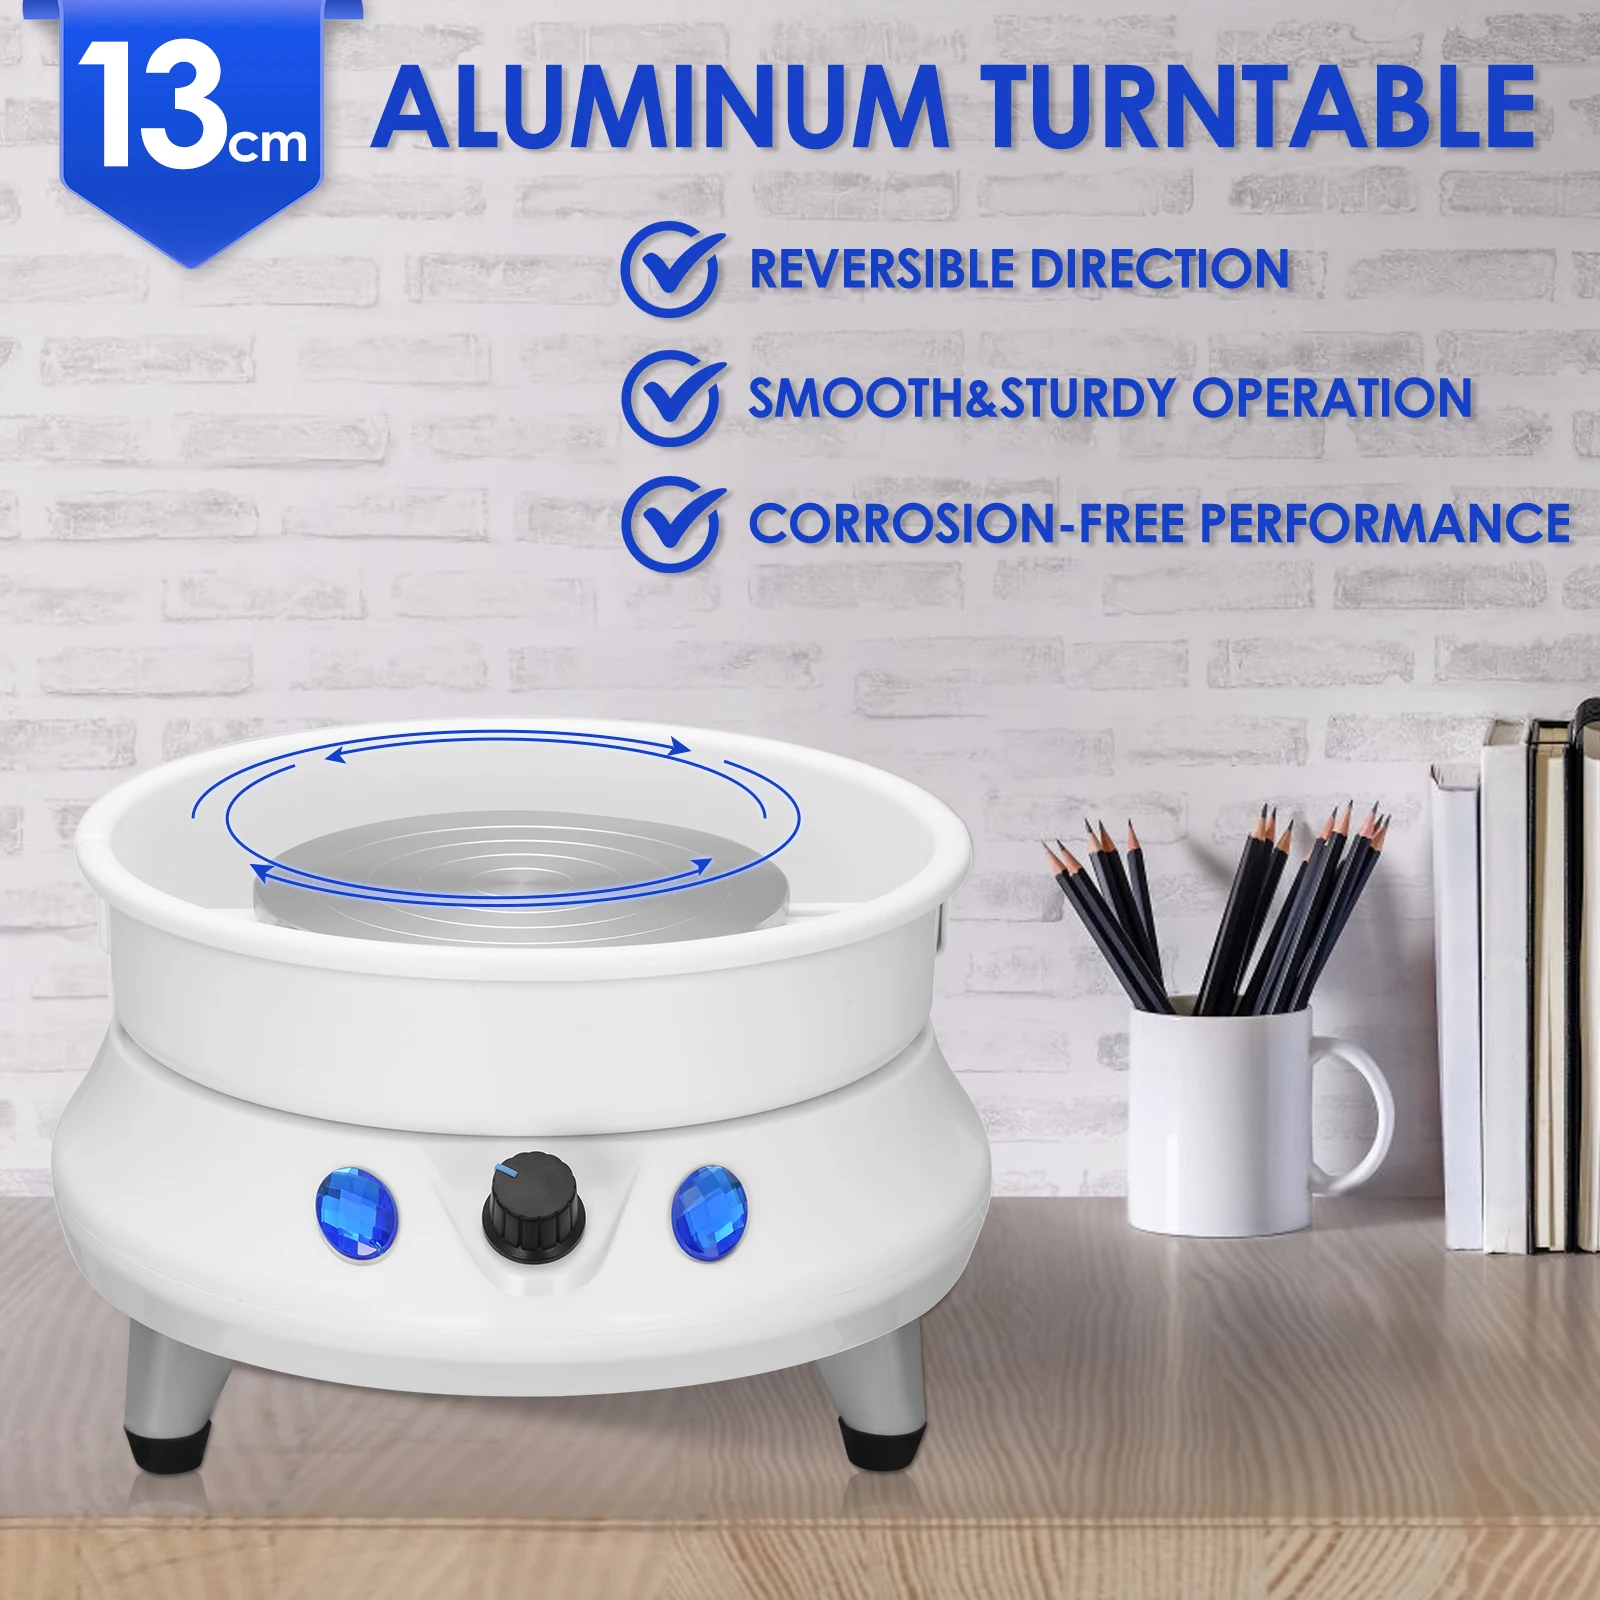 

60W Electric Pottery Wheel Machine Ceramic Work Adjustable Speed 13cm Turntable Circle Potters DIY Clay Art Craft Hand Tools